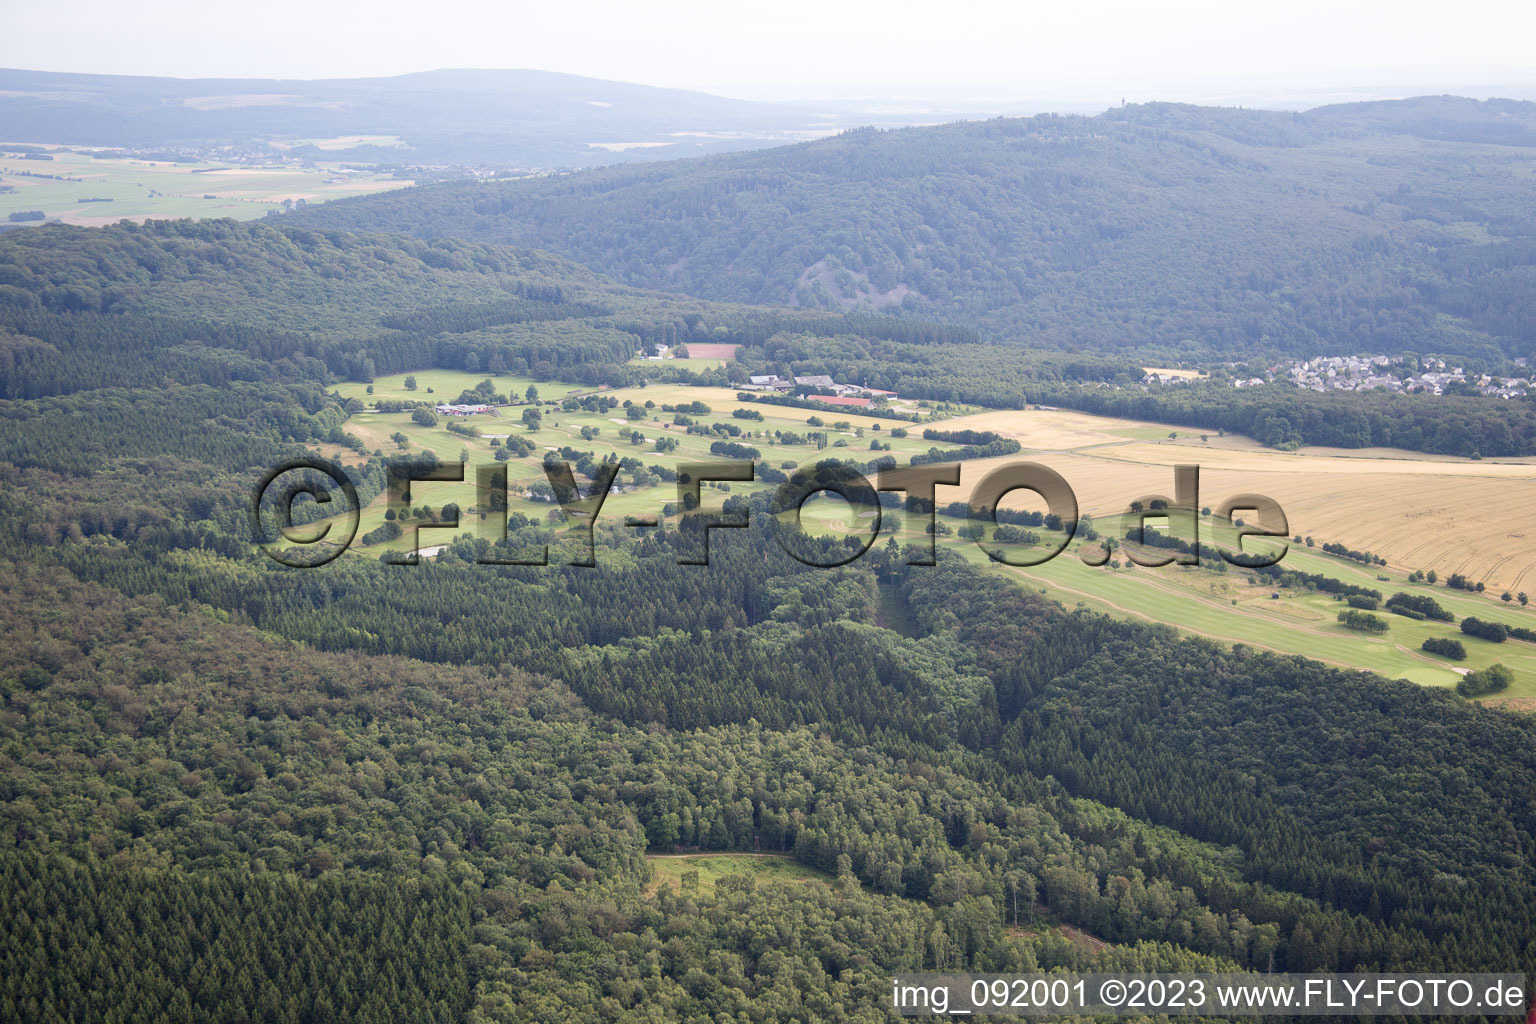 Grounds of the Golf course at GC Edelstein Hunsrueck e.V. in Kirschweiler in the state Rhineland-Palatinate, Germany